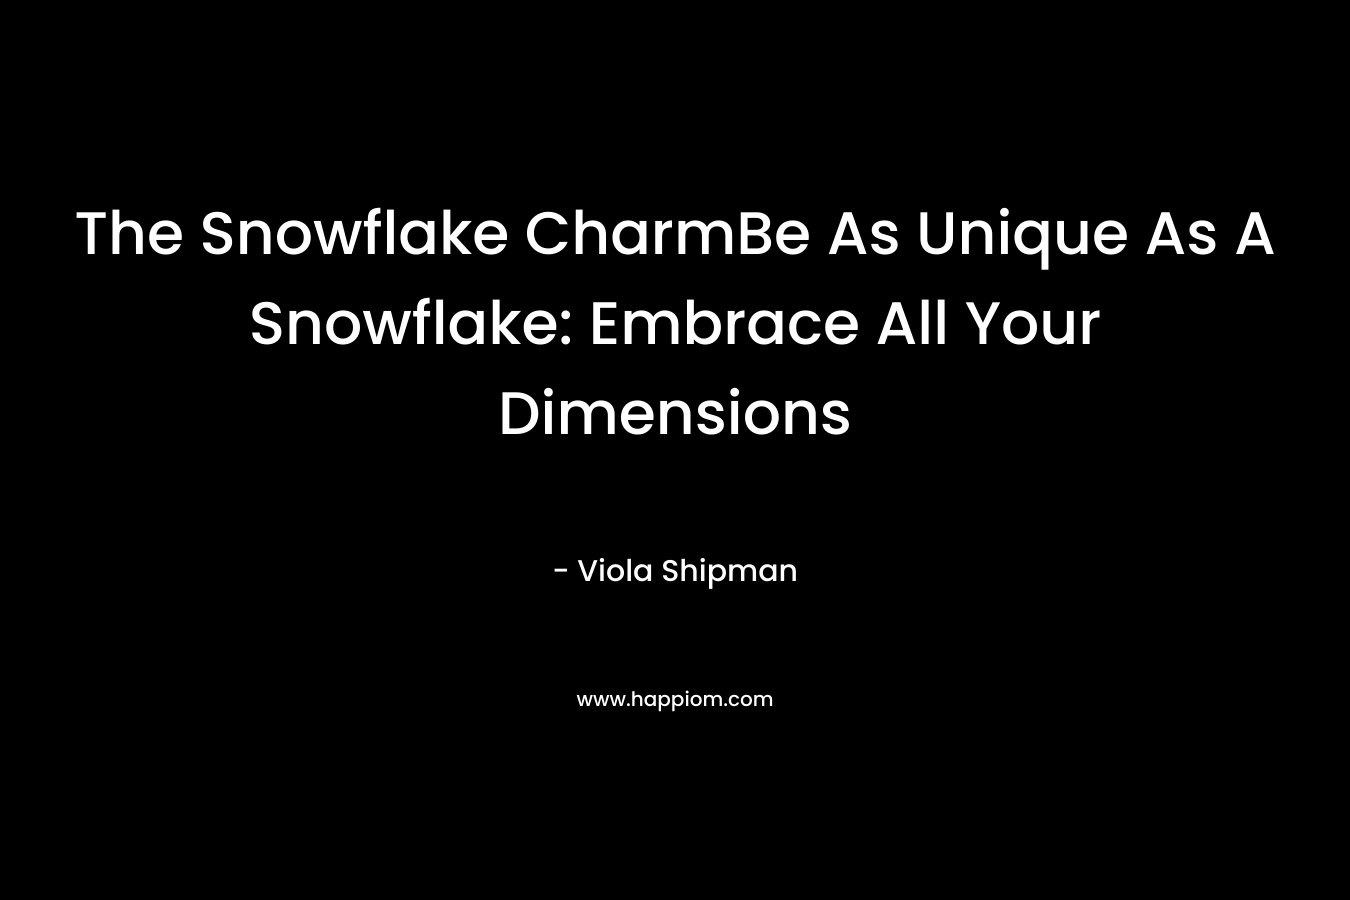 The Snowflake CharmBe As Unique As A Snowflake: Embrace All Your Dimensions – Viola Shipman